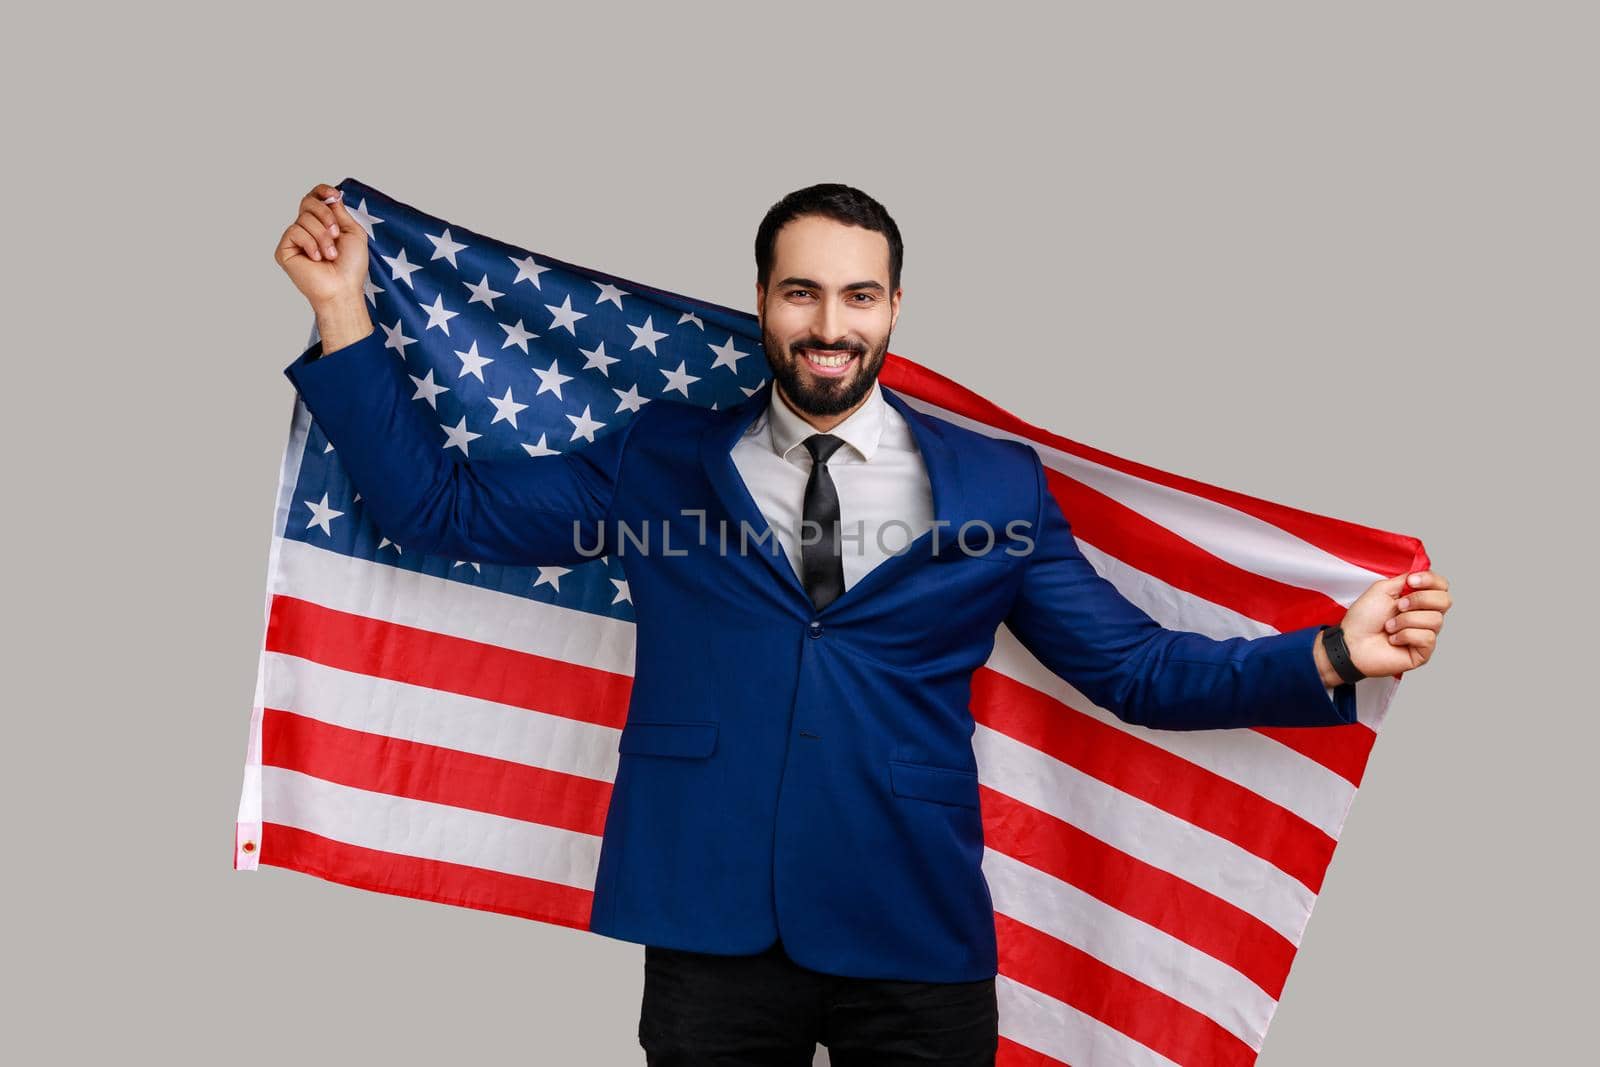 Smiling bearded man holding USA flag and looking at camera with happy look, celebrating national holiday, wearing official style suit. Indoor studio shot isolated on gray background.